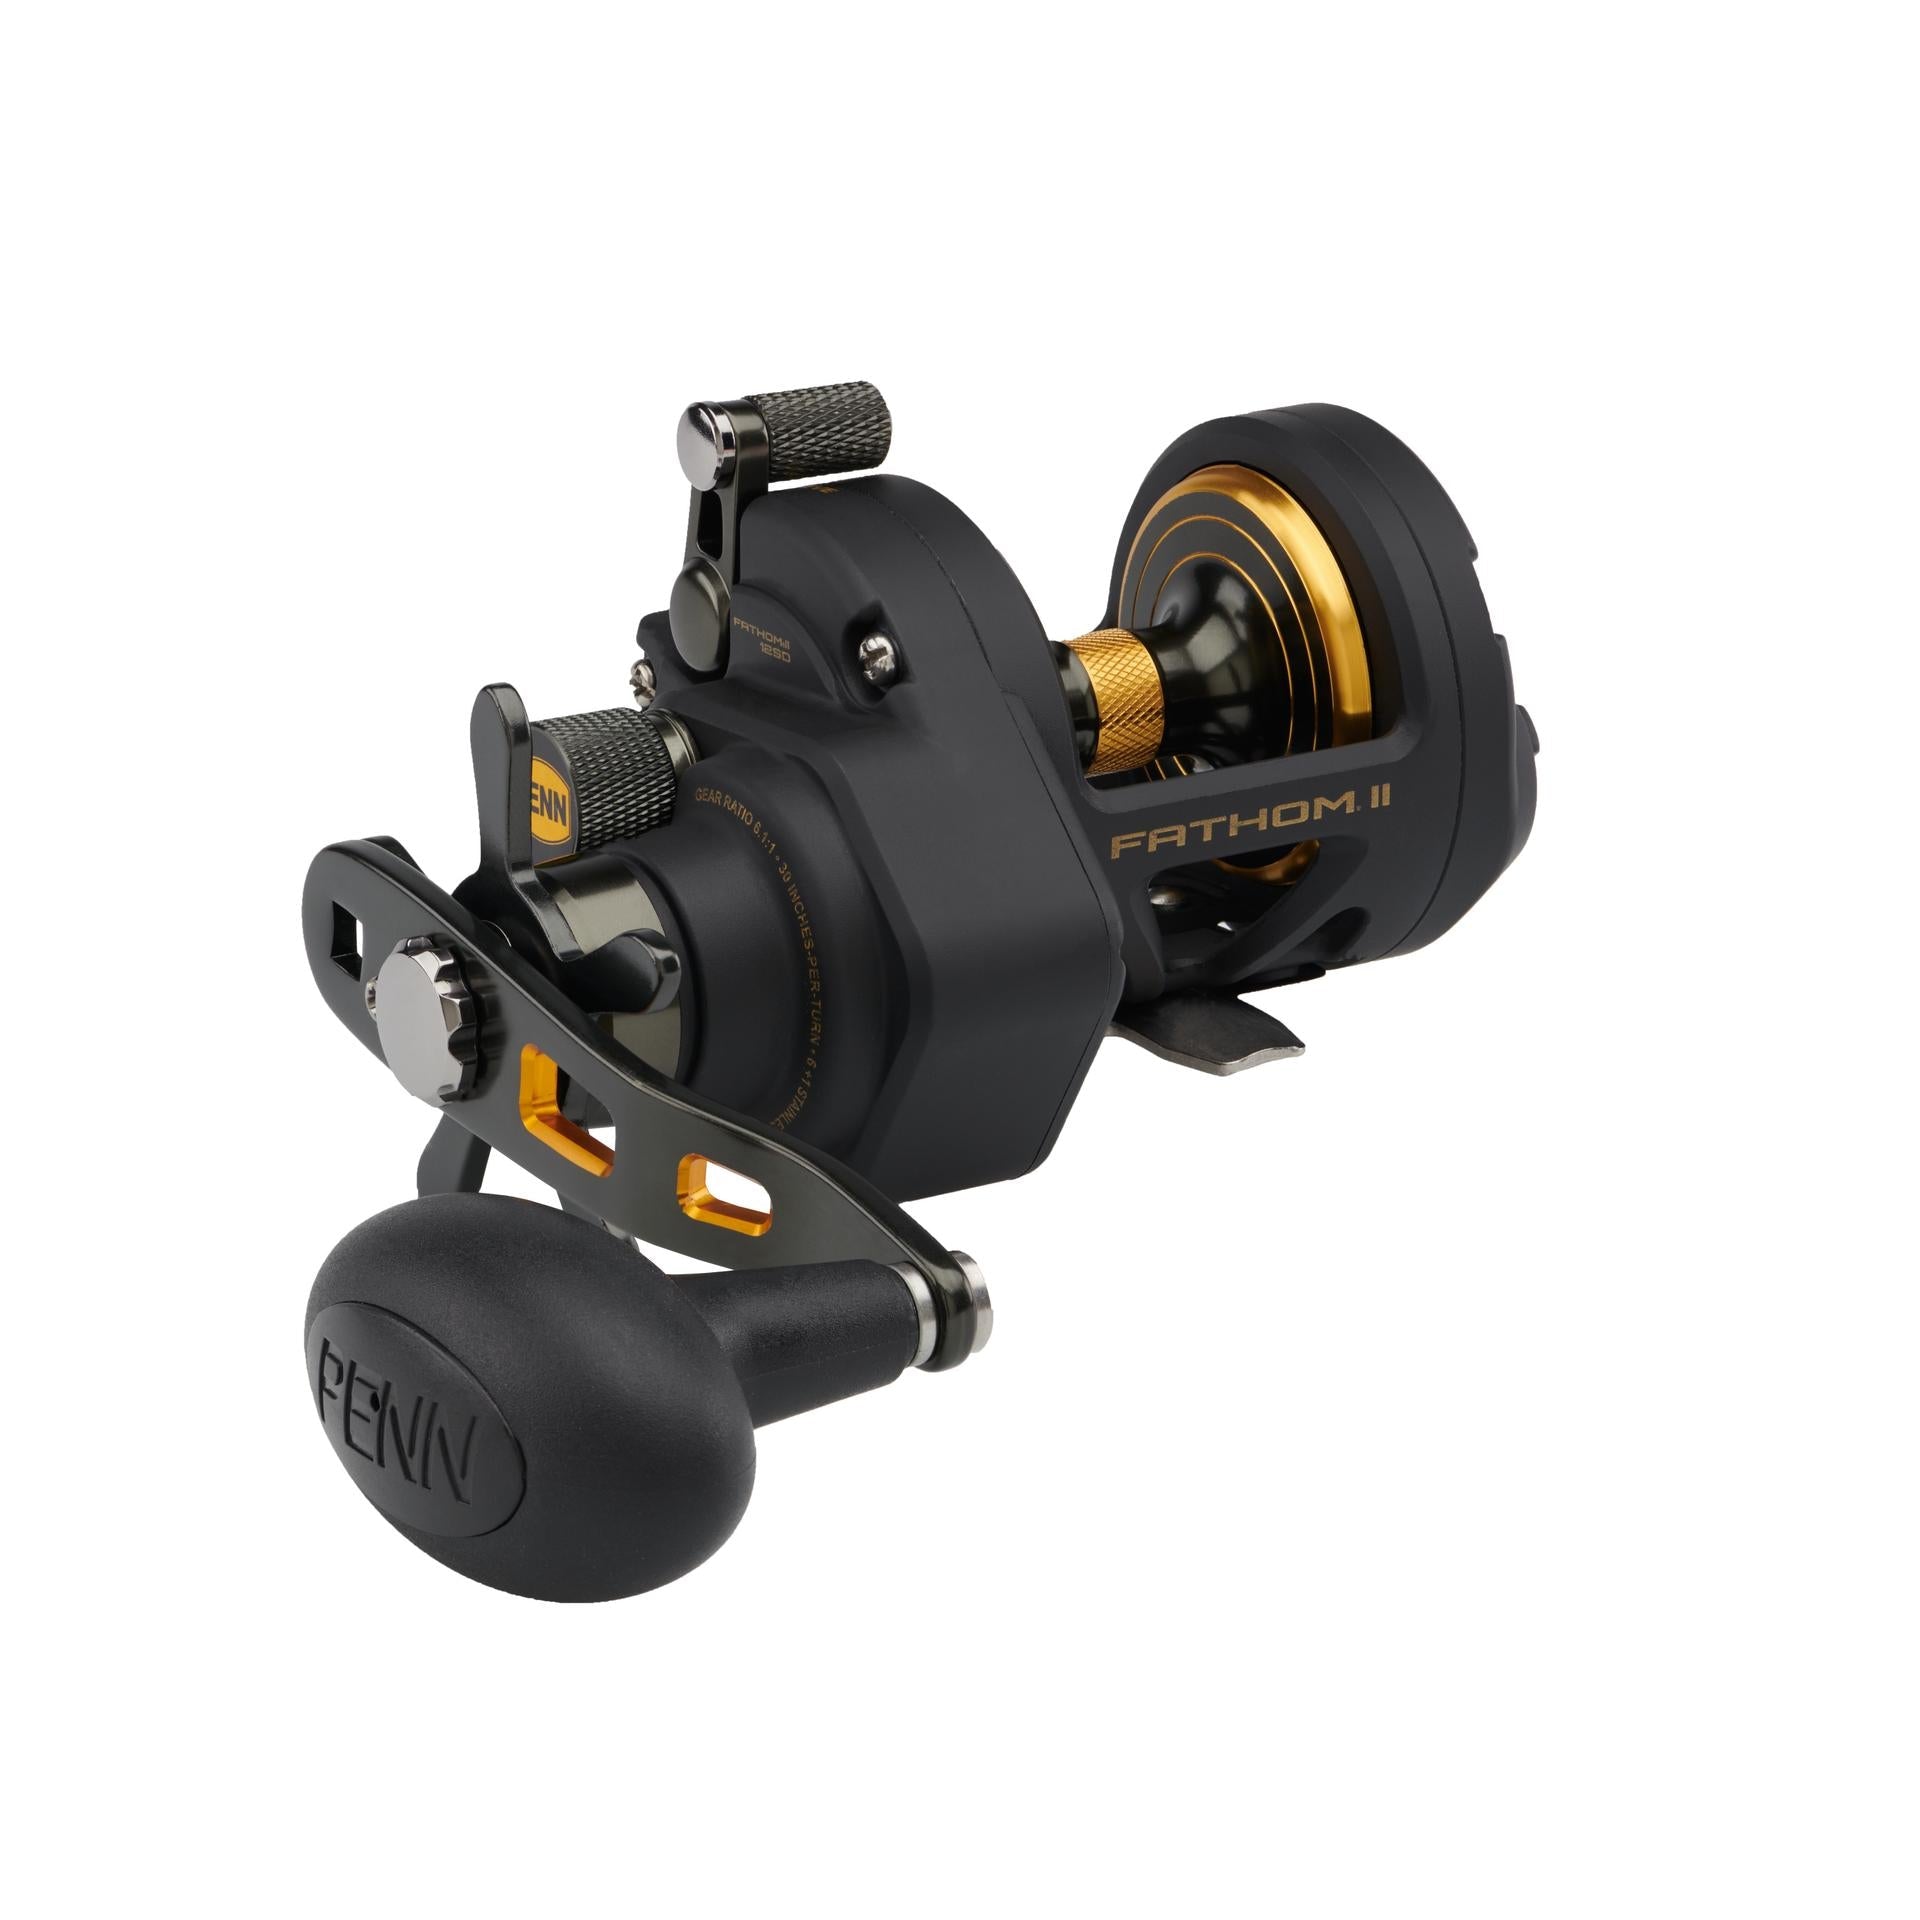 PENN Squall II Star Drag Conventional Reel, Size 30, Right-Hand